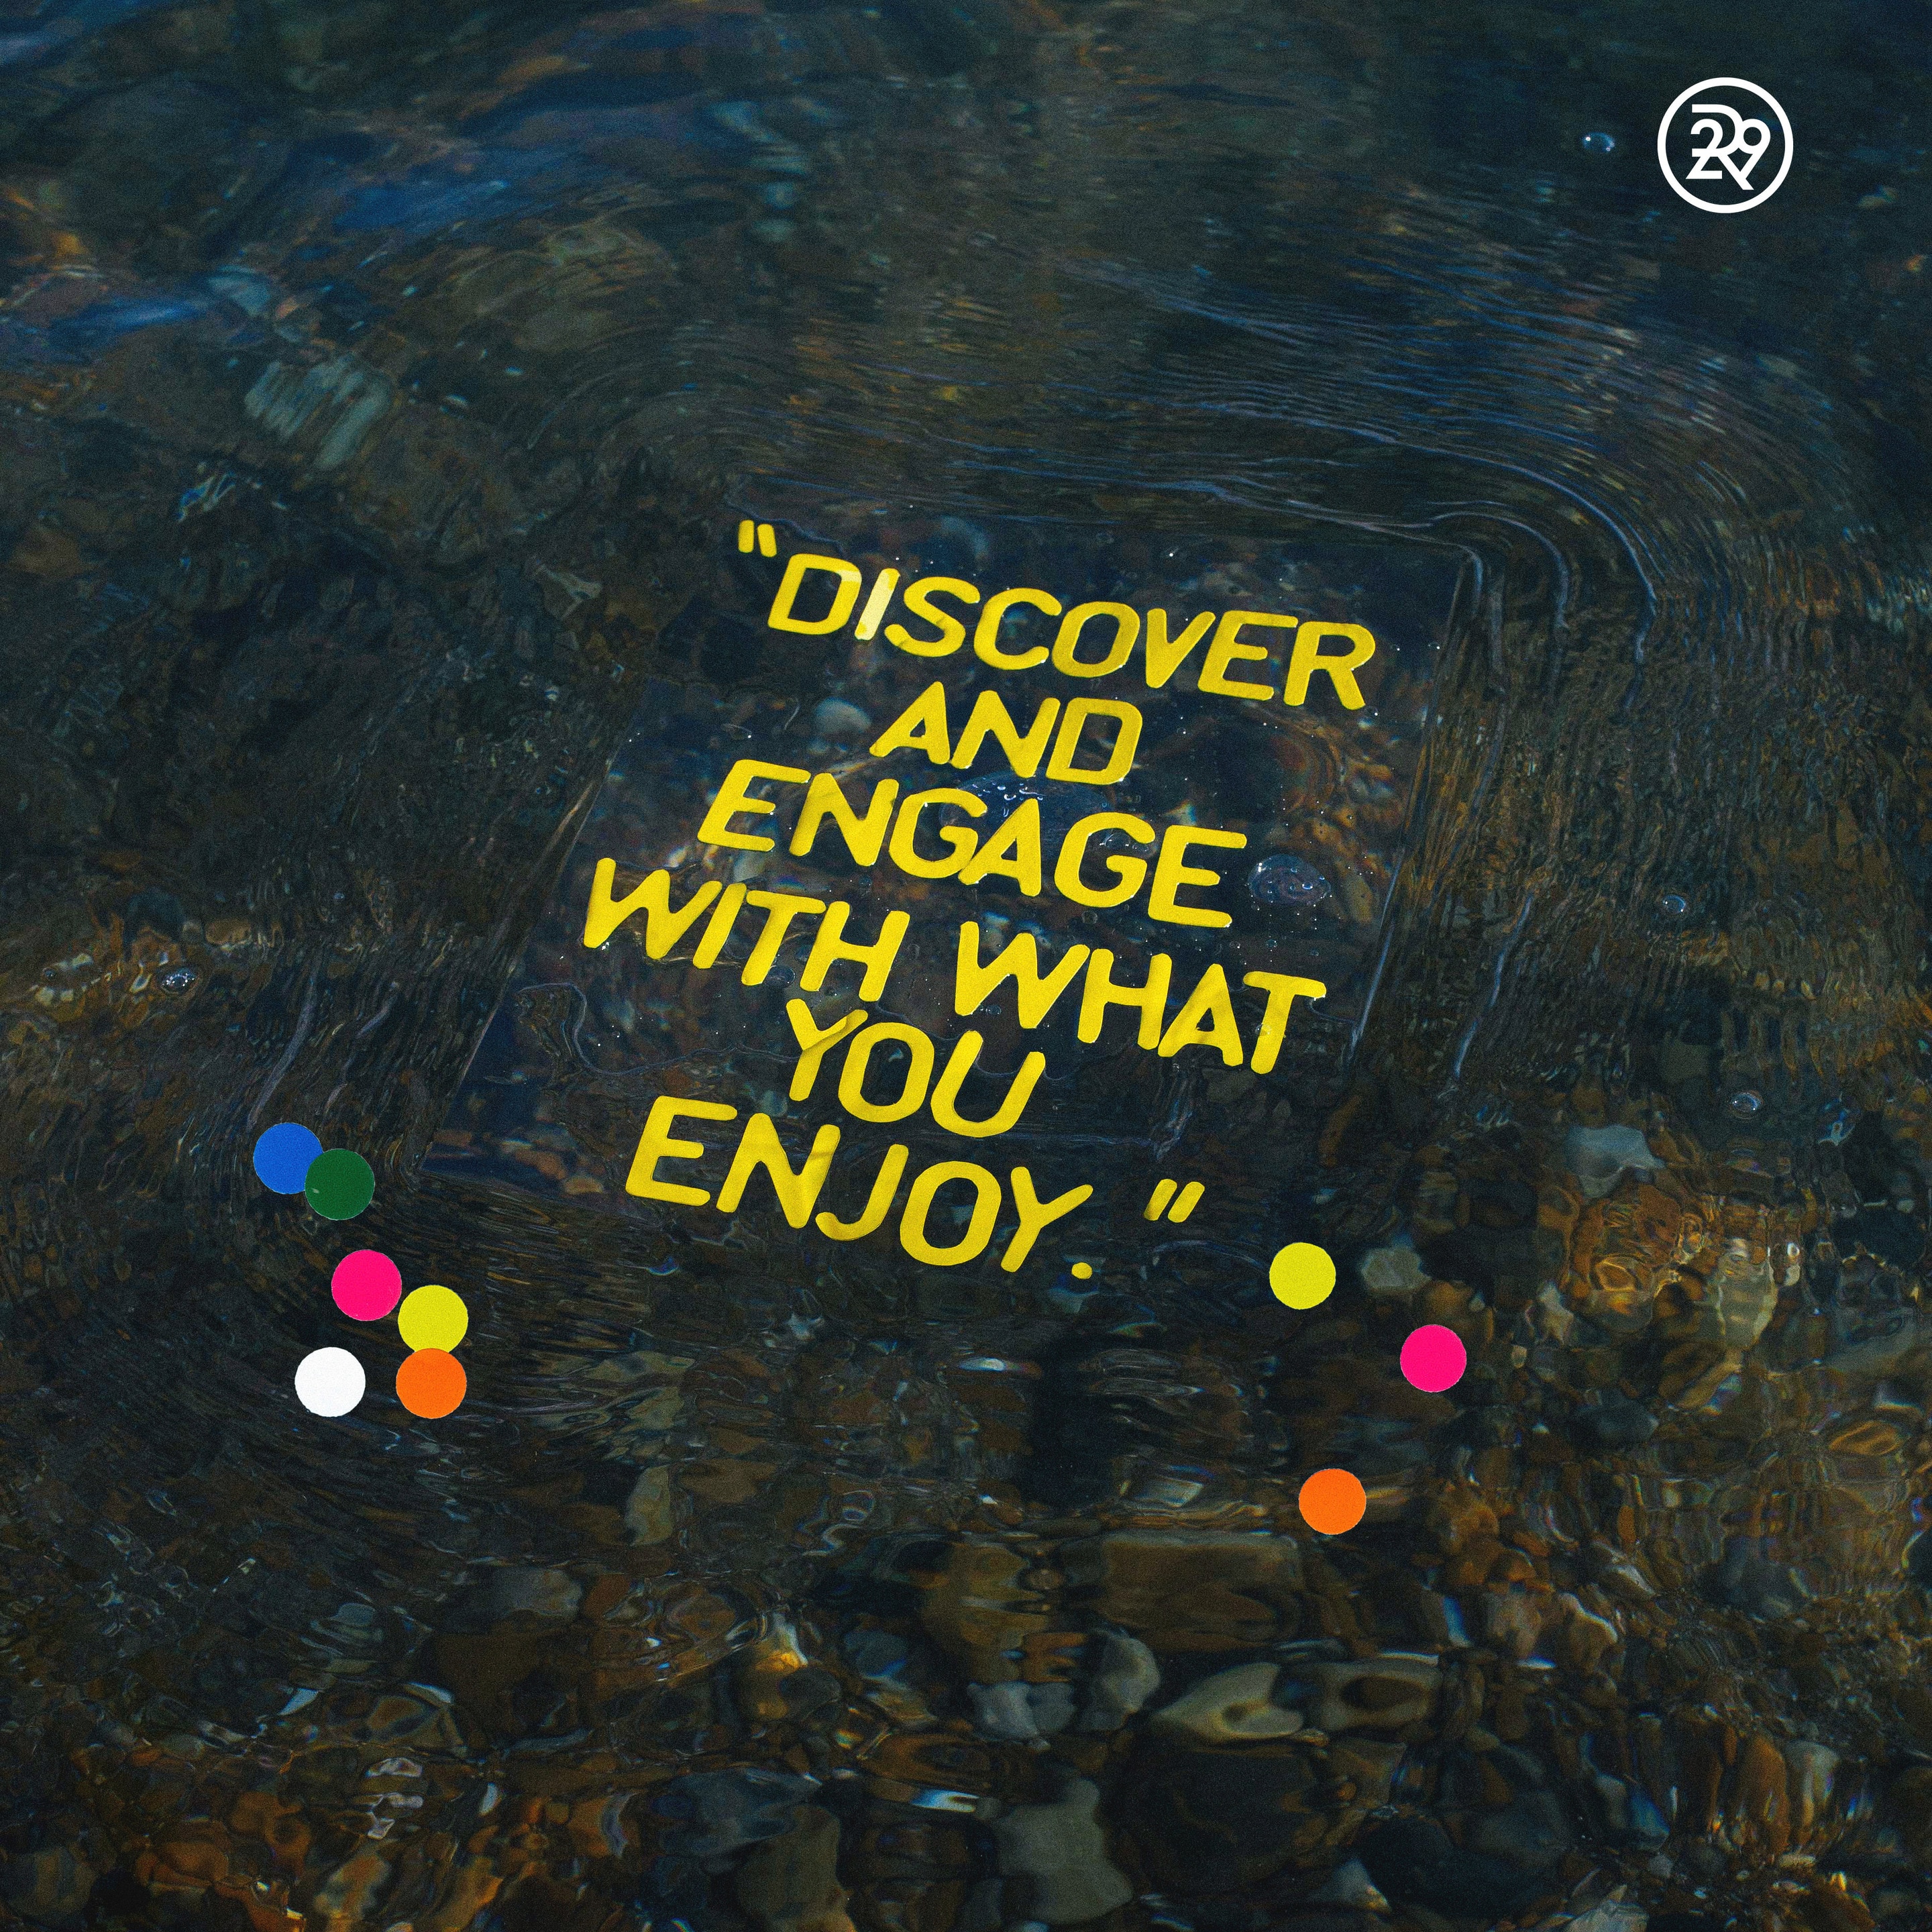 Discover and engage with what you enjoy